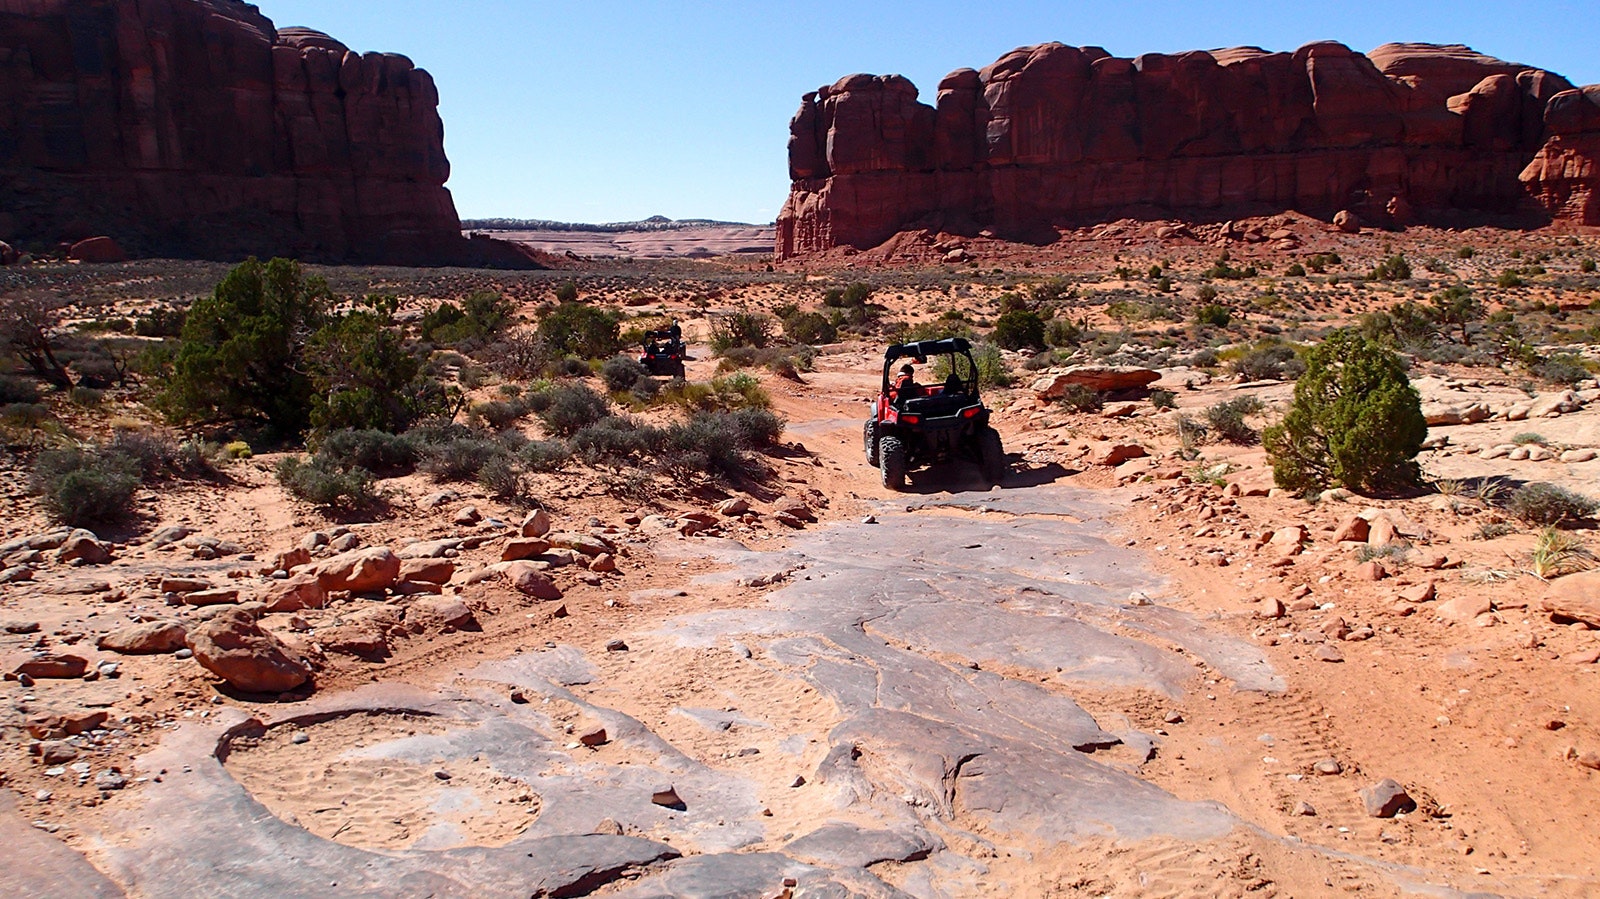 A line of ATVs make their way across a rugged trail through the Moab region of Utah.